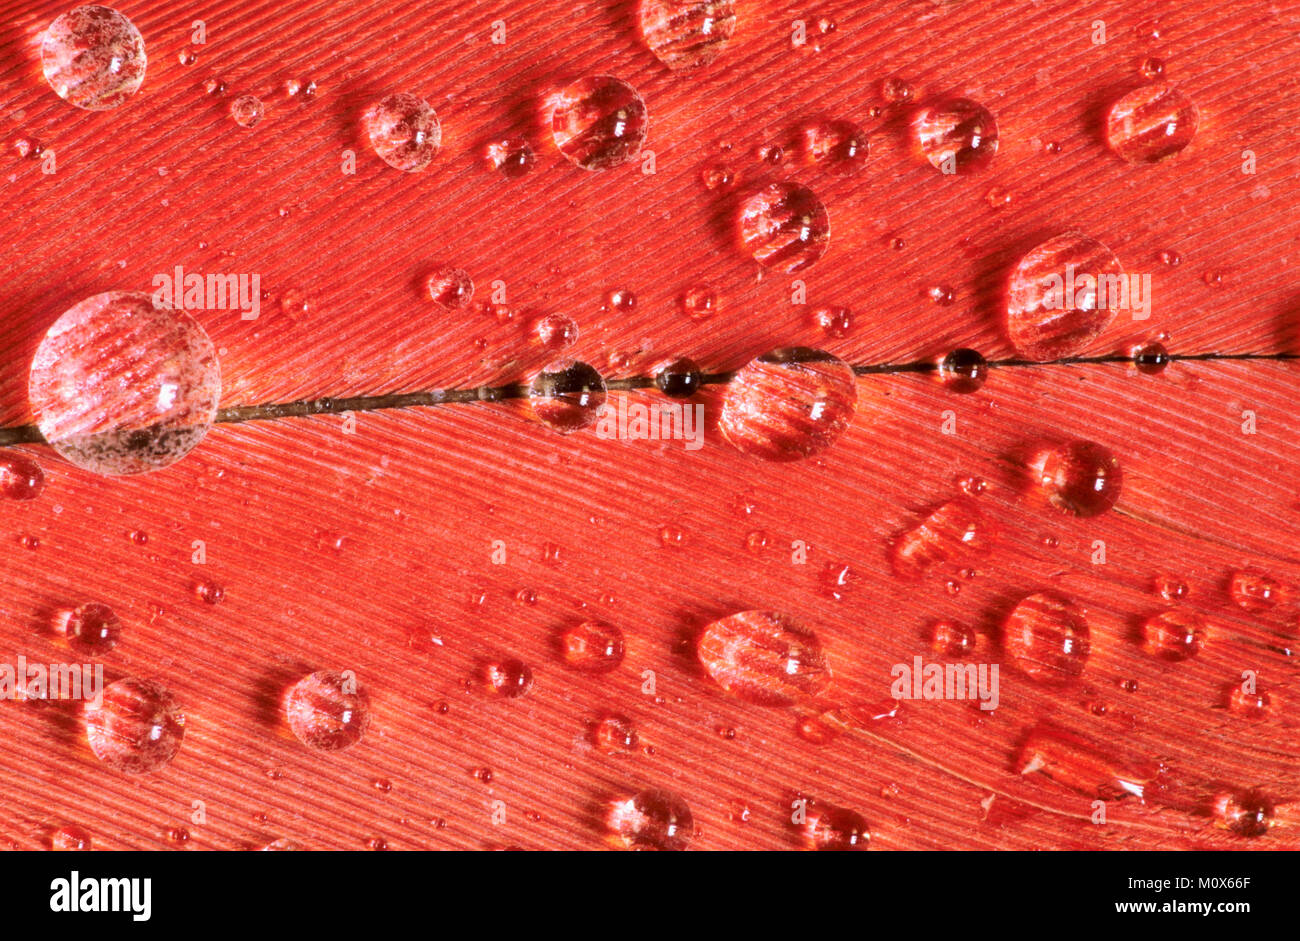 Chilean Flamingo, feather detail with waterdrops / (Phoenicopterus chilensis) | Chile-Flamingo, Federdetail / (Phoenicopterus chilensis) Stock Photo